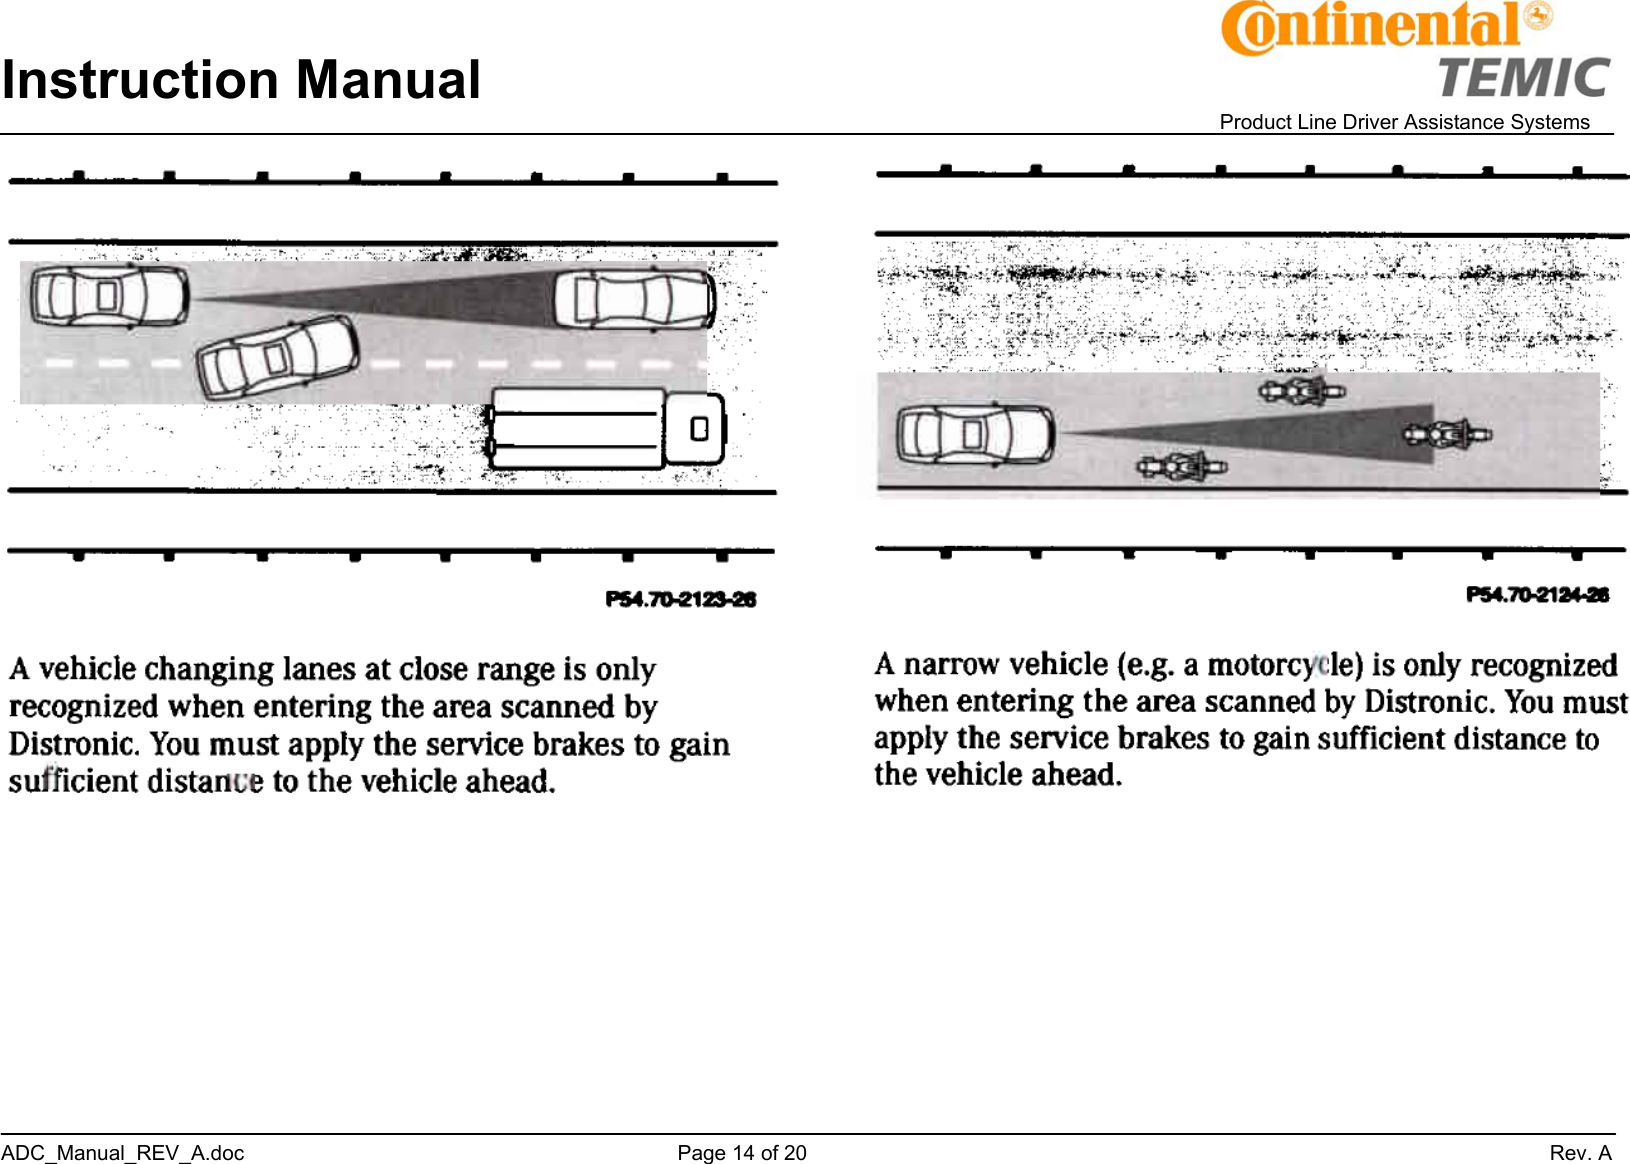 Instruction Manual    Product Line Driver Assistance Systems ADC_Manual_REV_A.doc     Page 14 of 20                 Rev. A   